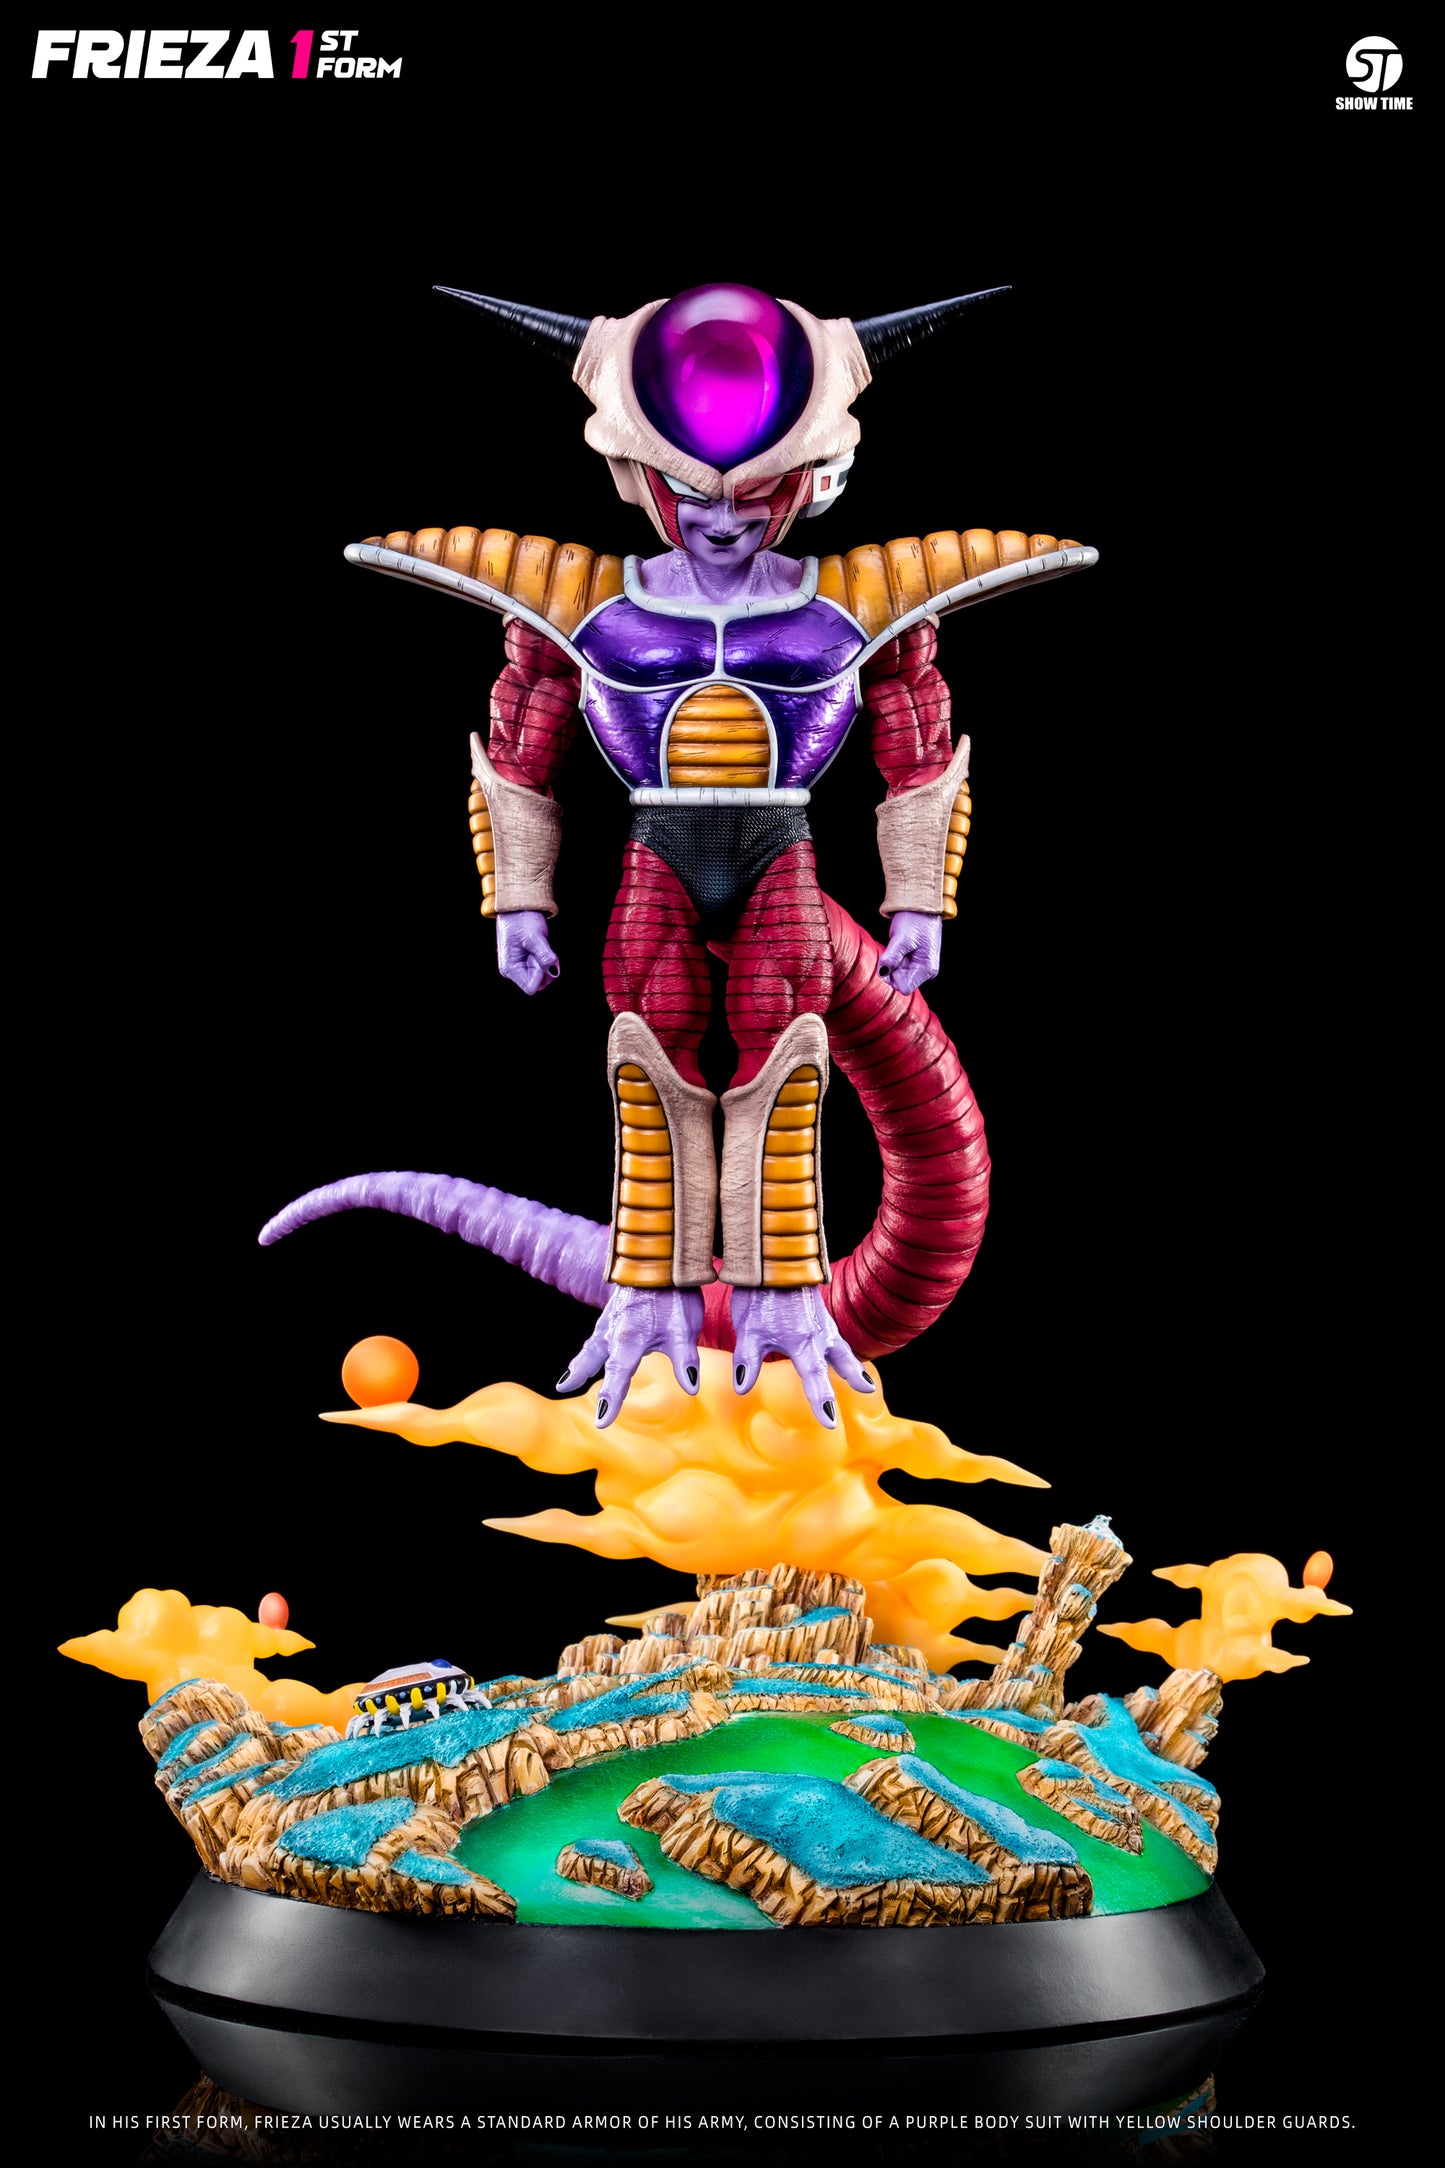 Show Time - Frieza First Form